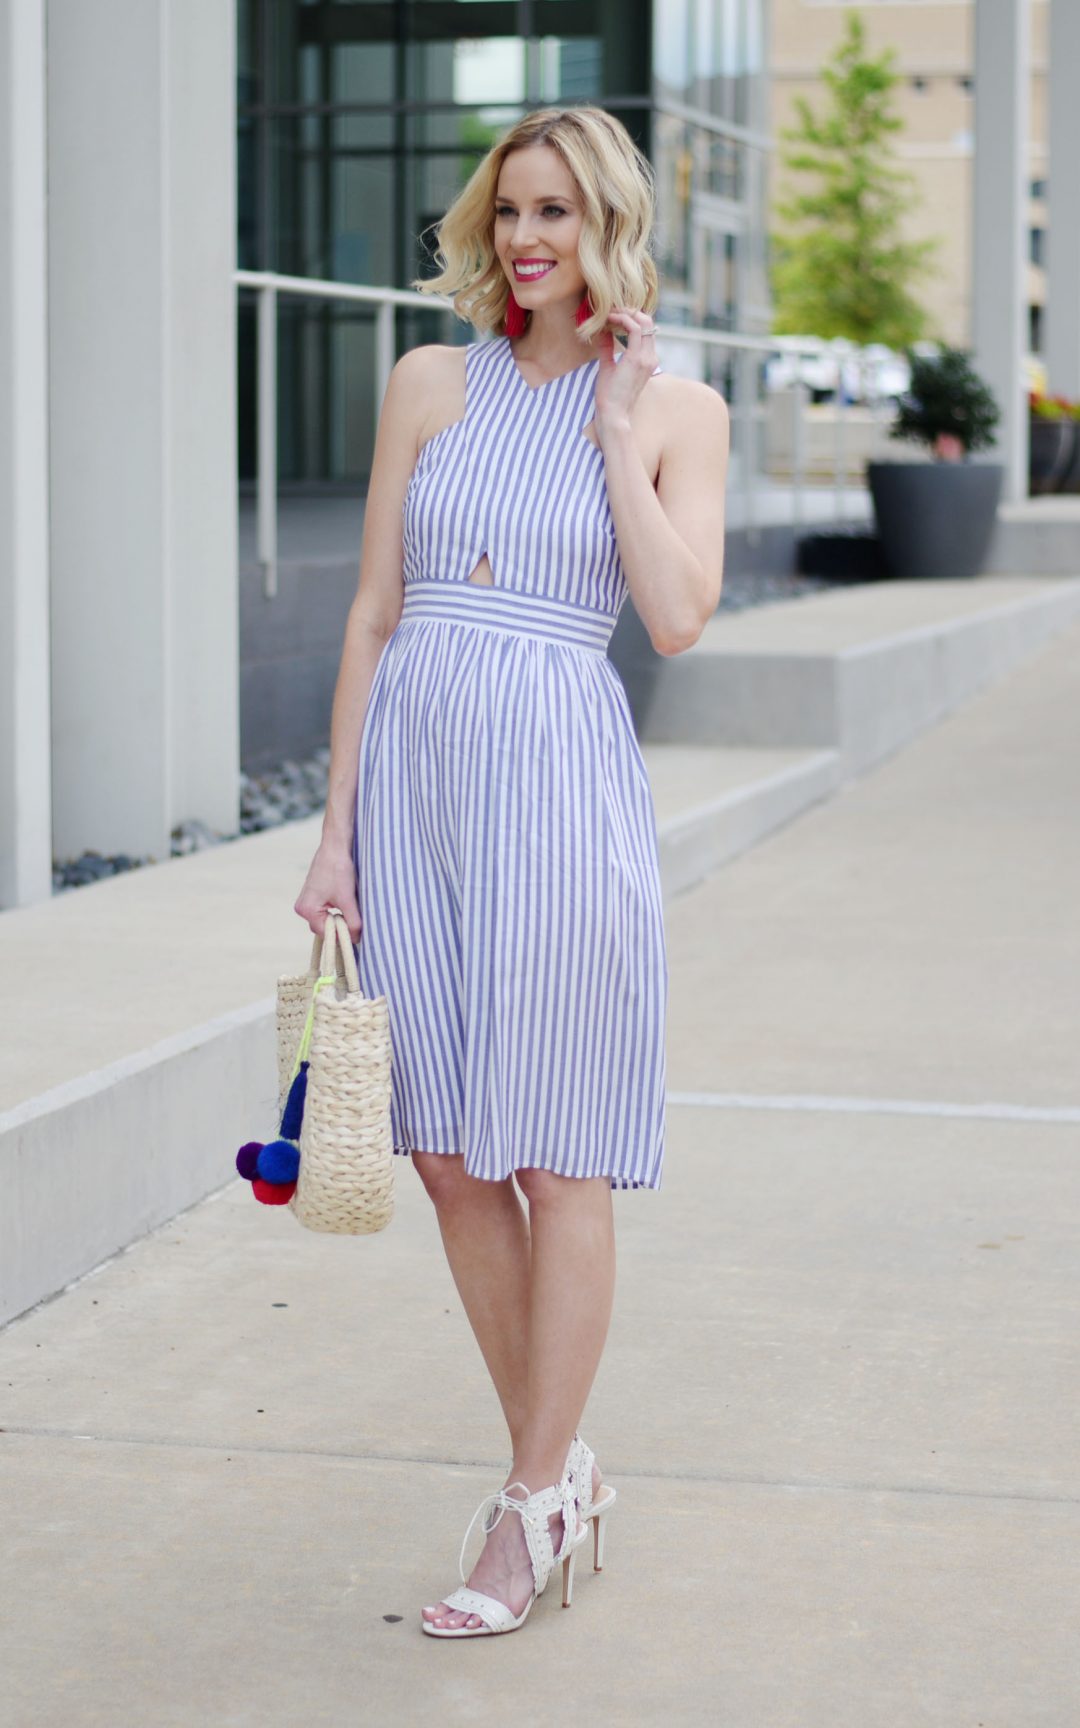 Blue and White Cutout Dress - Straight A Style